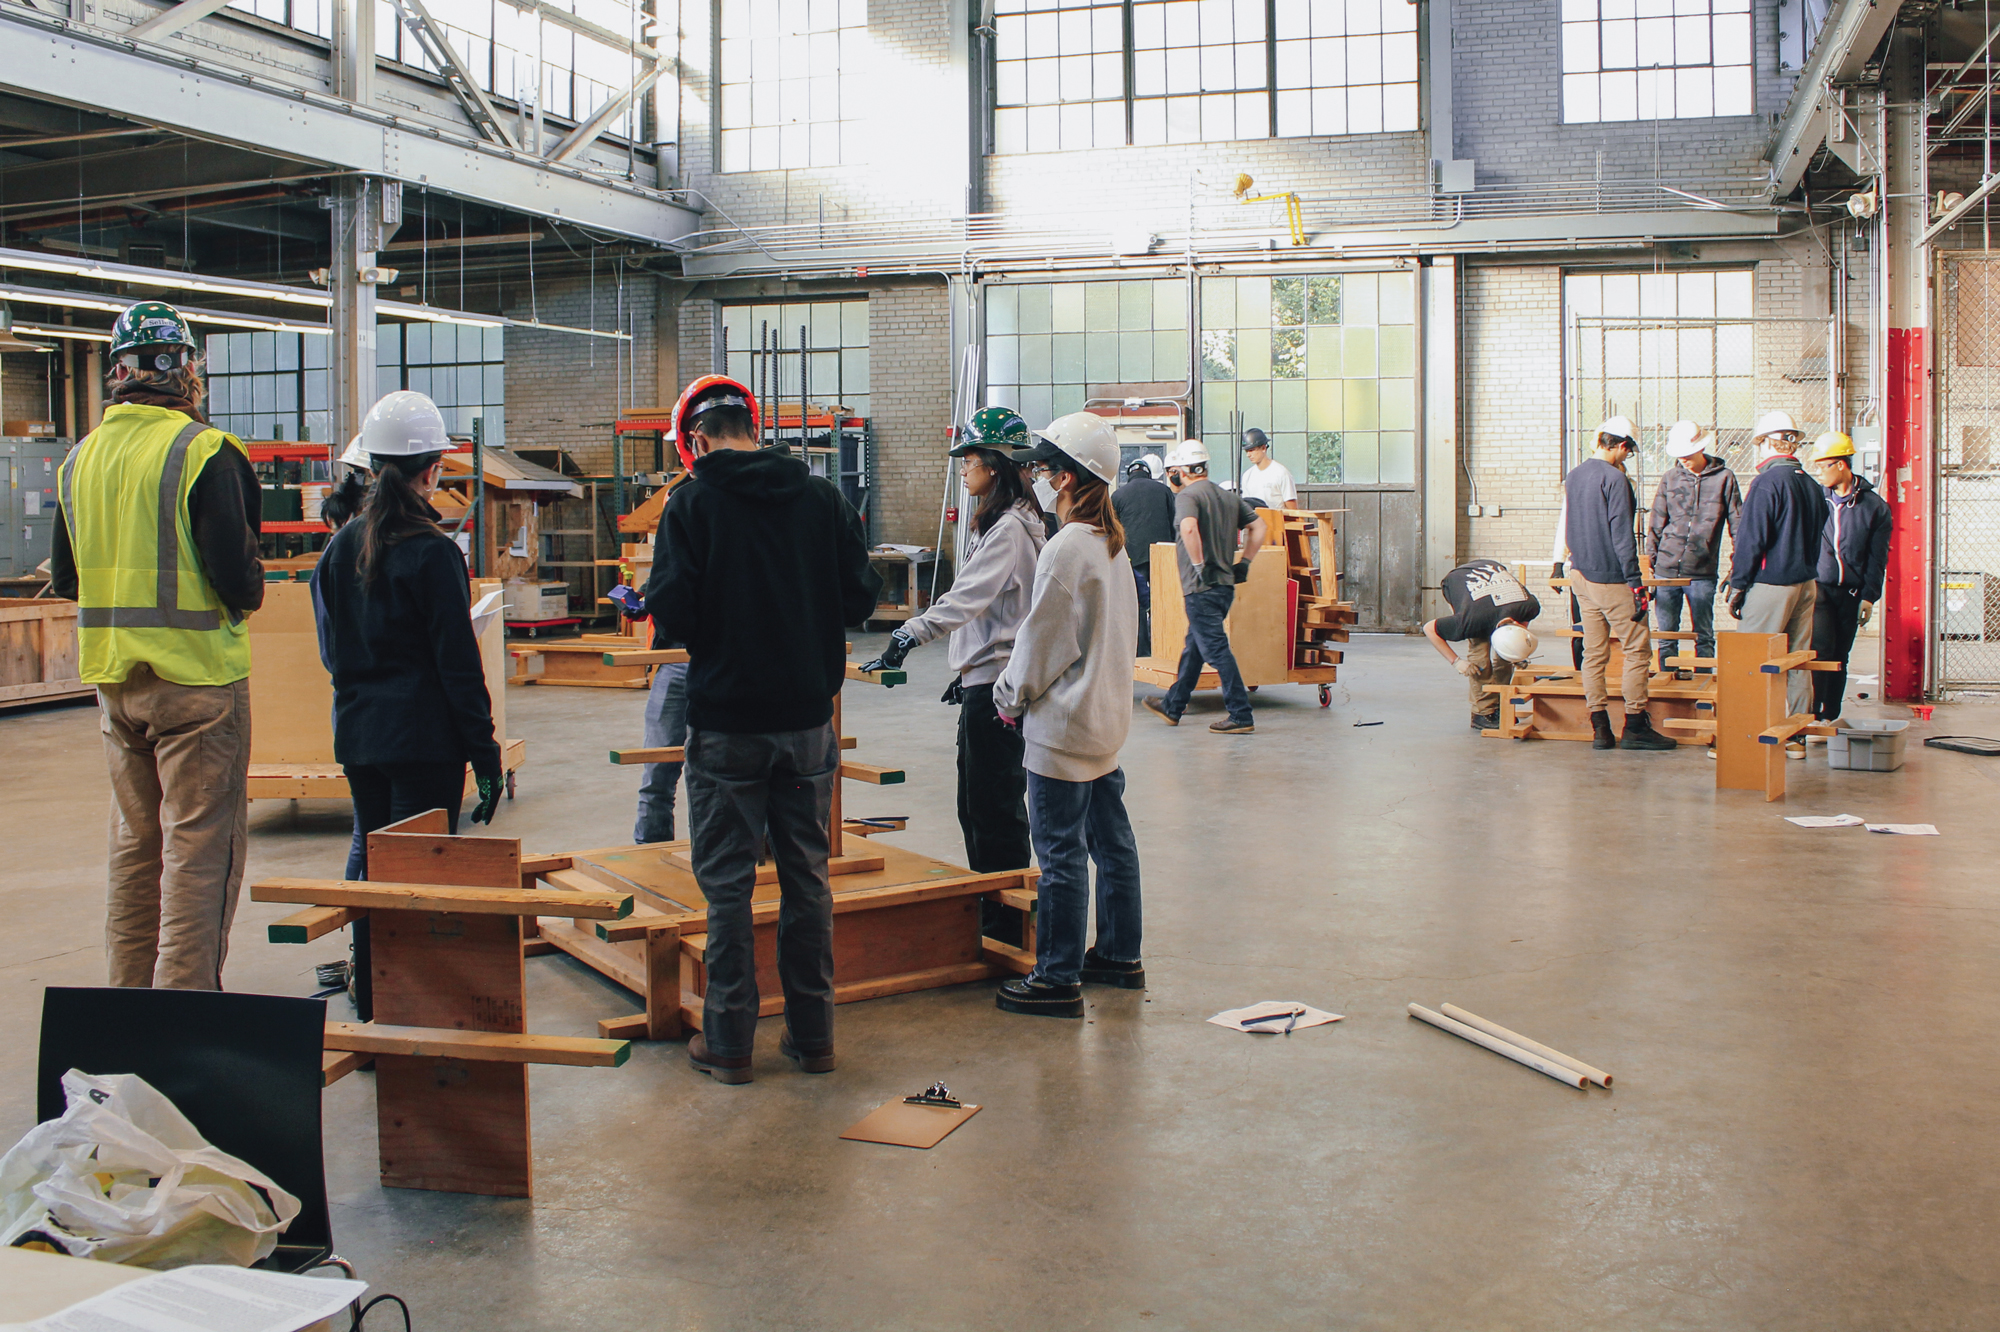 A group of students wearing hard hats and safety goggles in a large room with construction materials